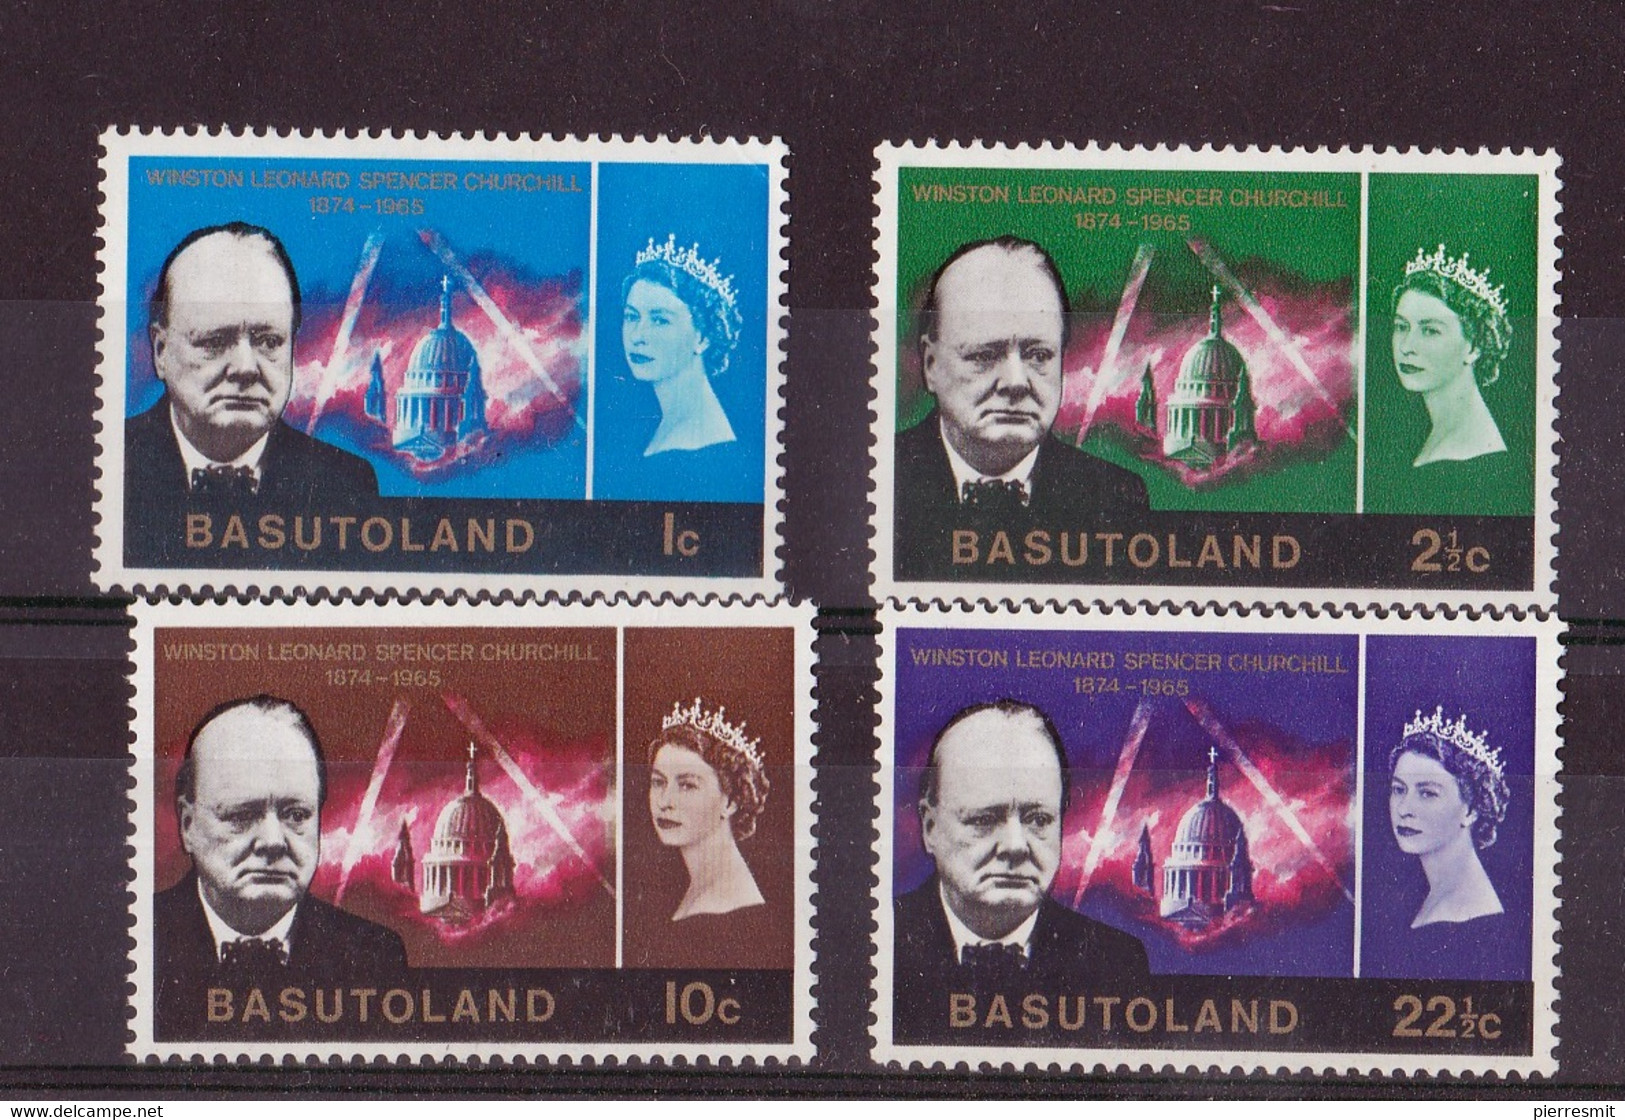 1966 Churchill Commemoration, Mint With Traces Of Hinge Remains - 1965-1966 Self Government